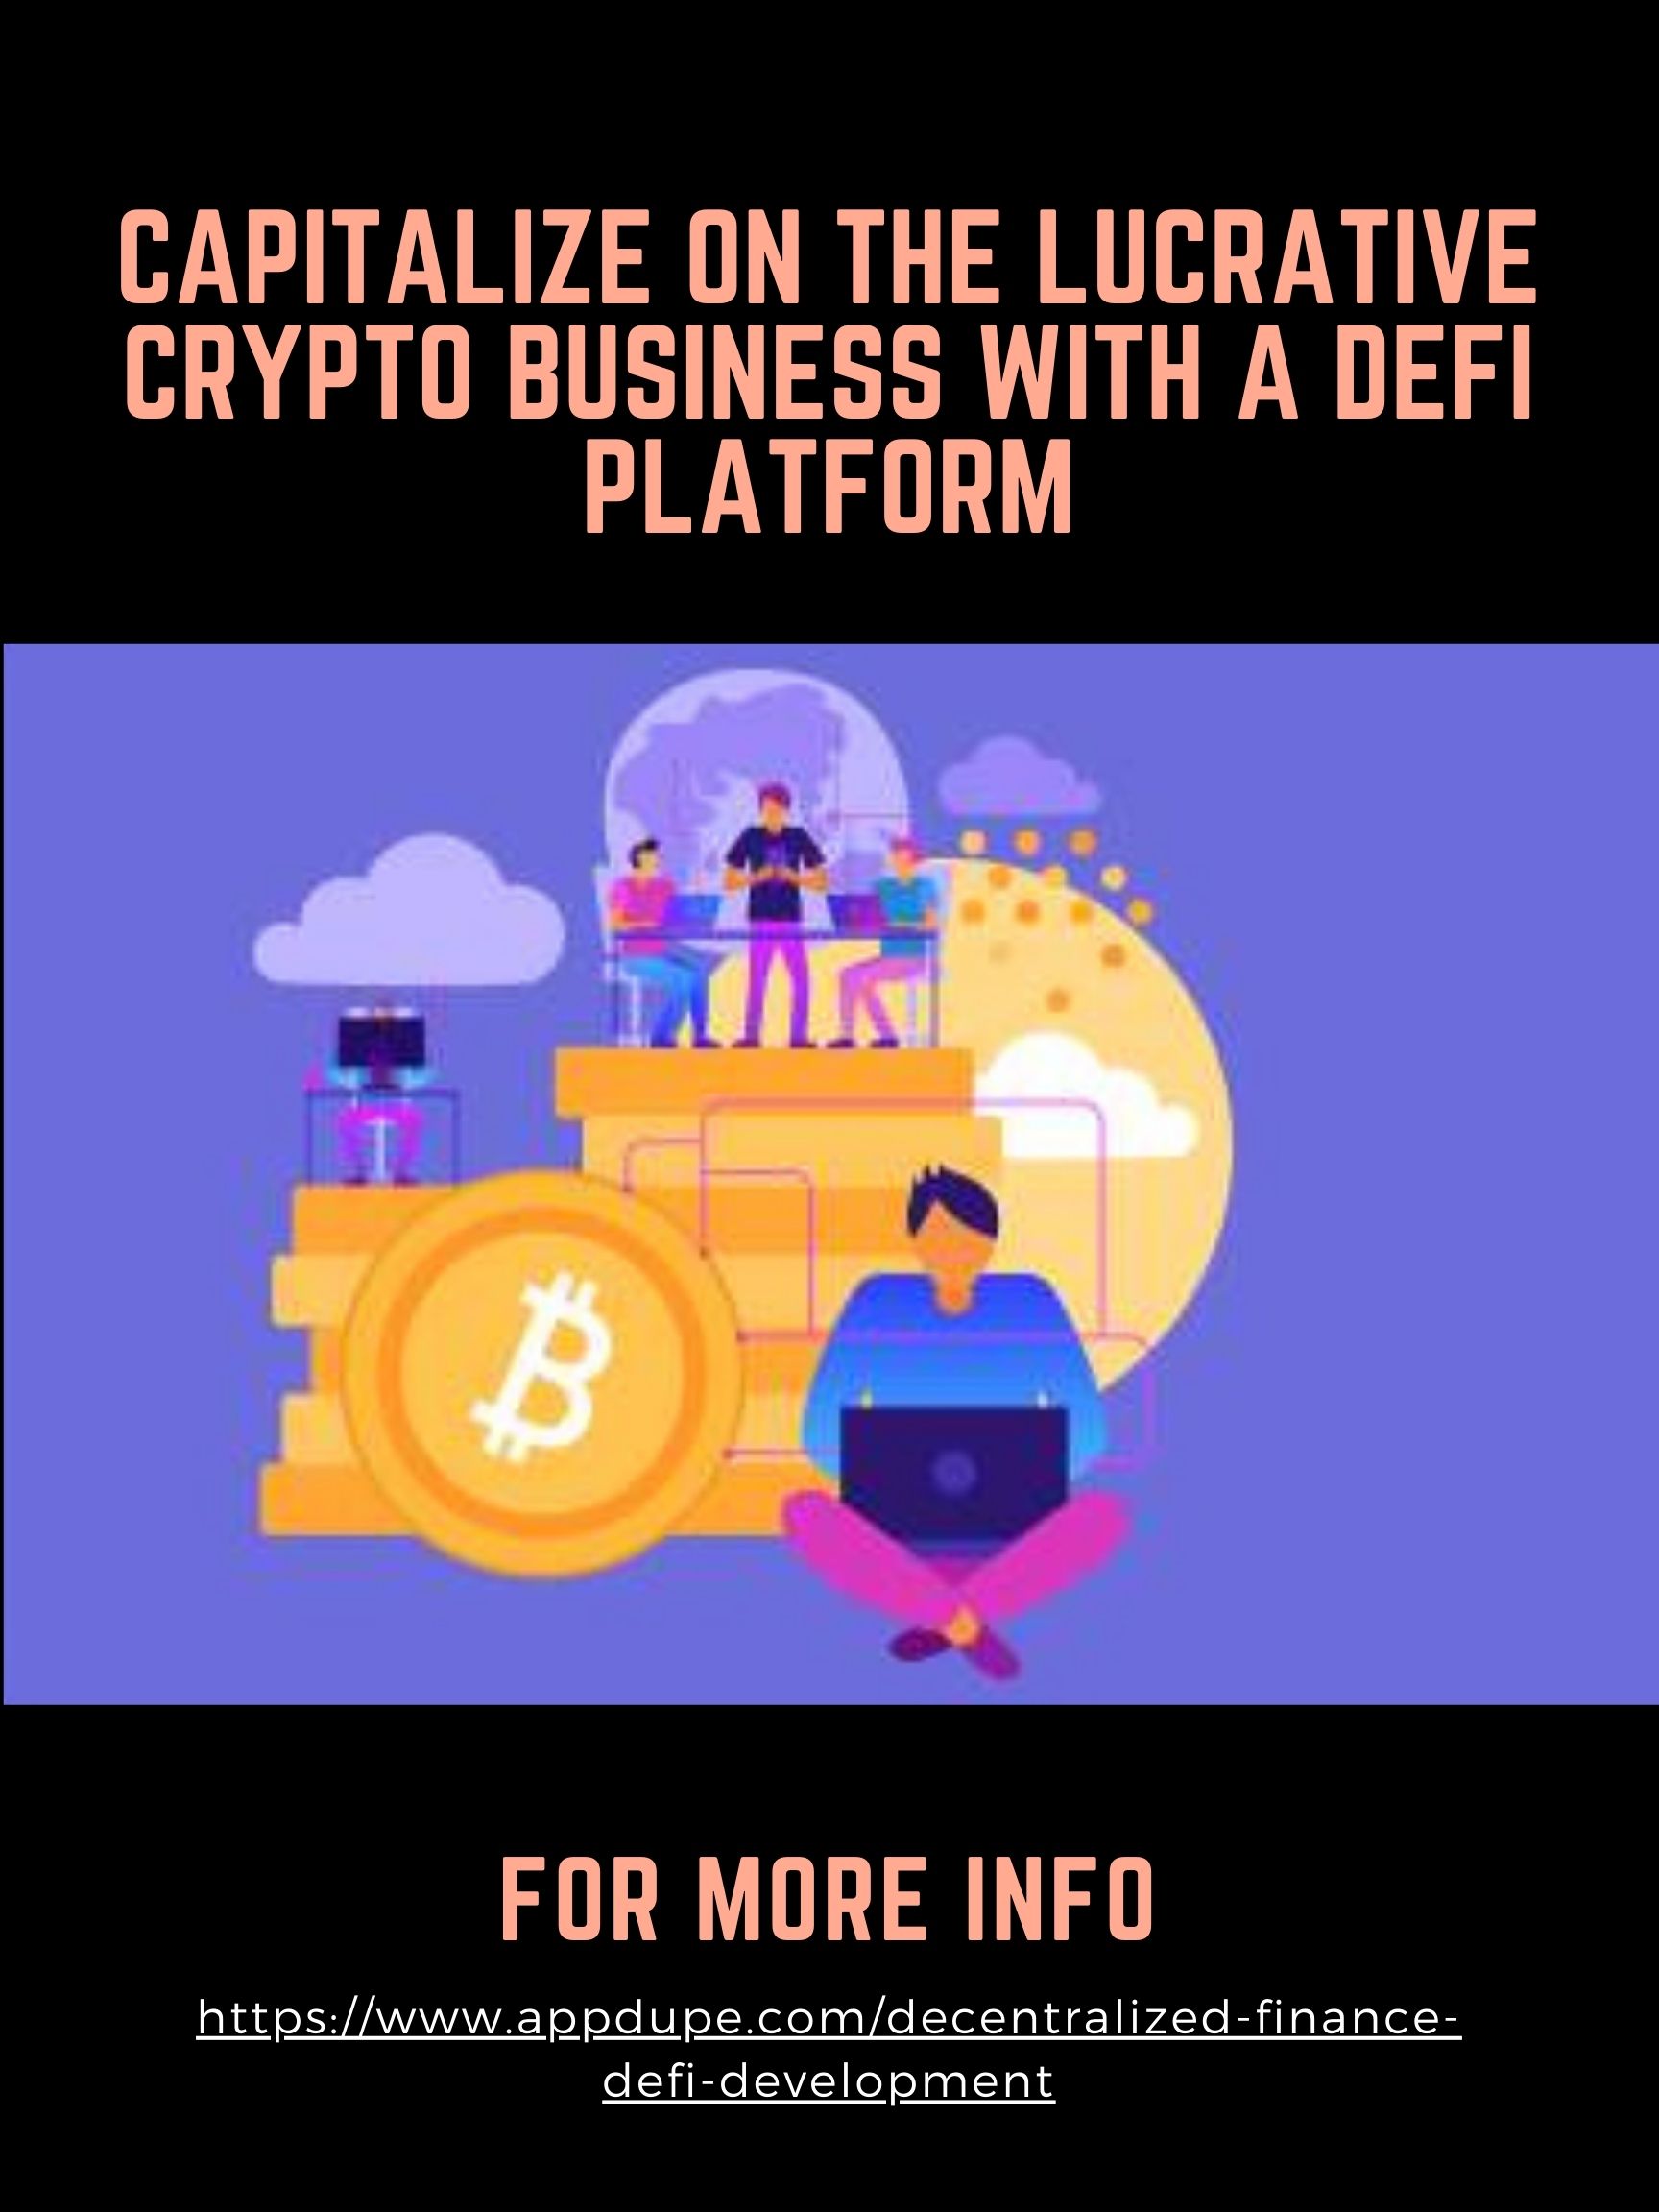 Article about Capitalize On The Lucrative Crypto Business With A DeFi Platform